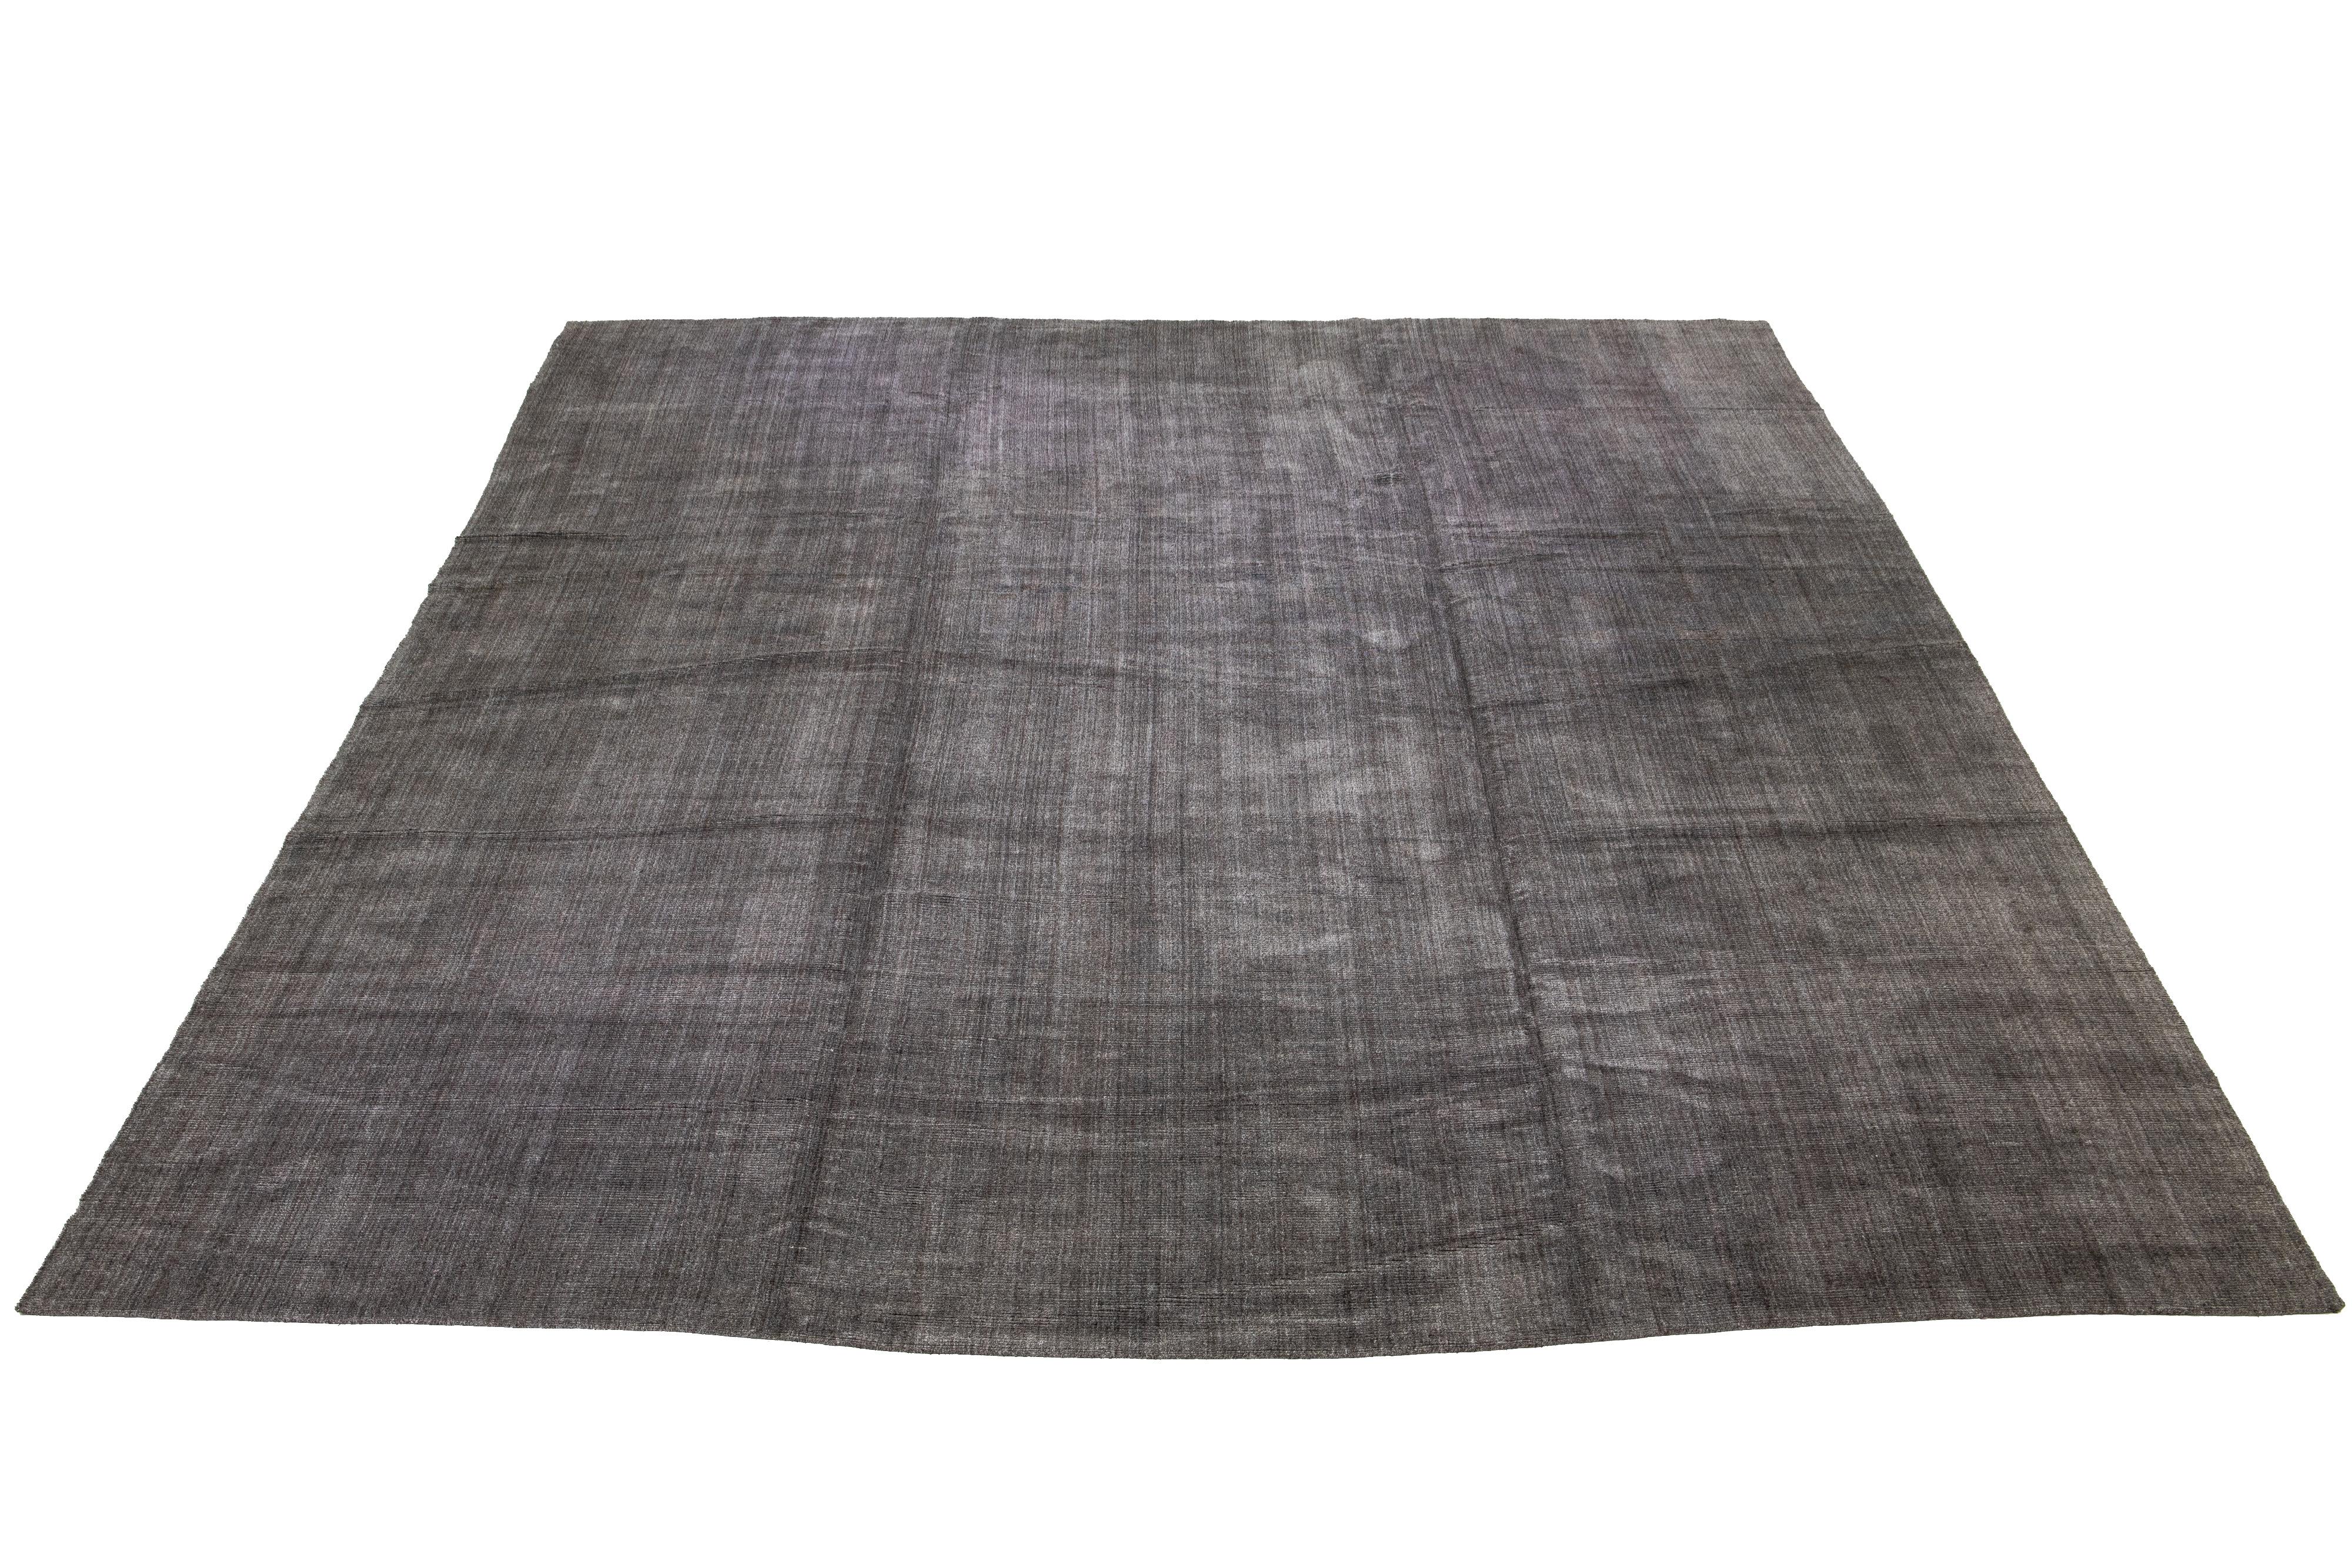 Beautiful oversized handmade rug from India features a combination of bamboo, silk, and wool materials with a gorgeous gray field. This rug showcases a captivating, all-over solid design.

This rug measures 16'2